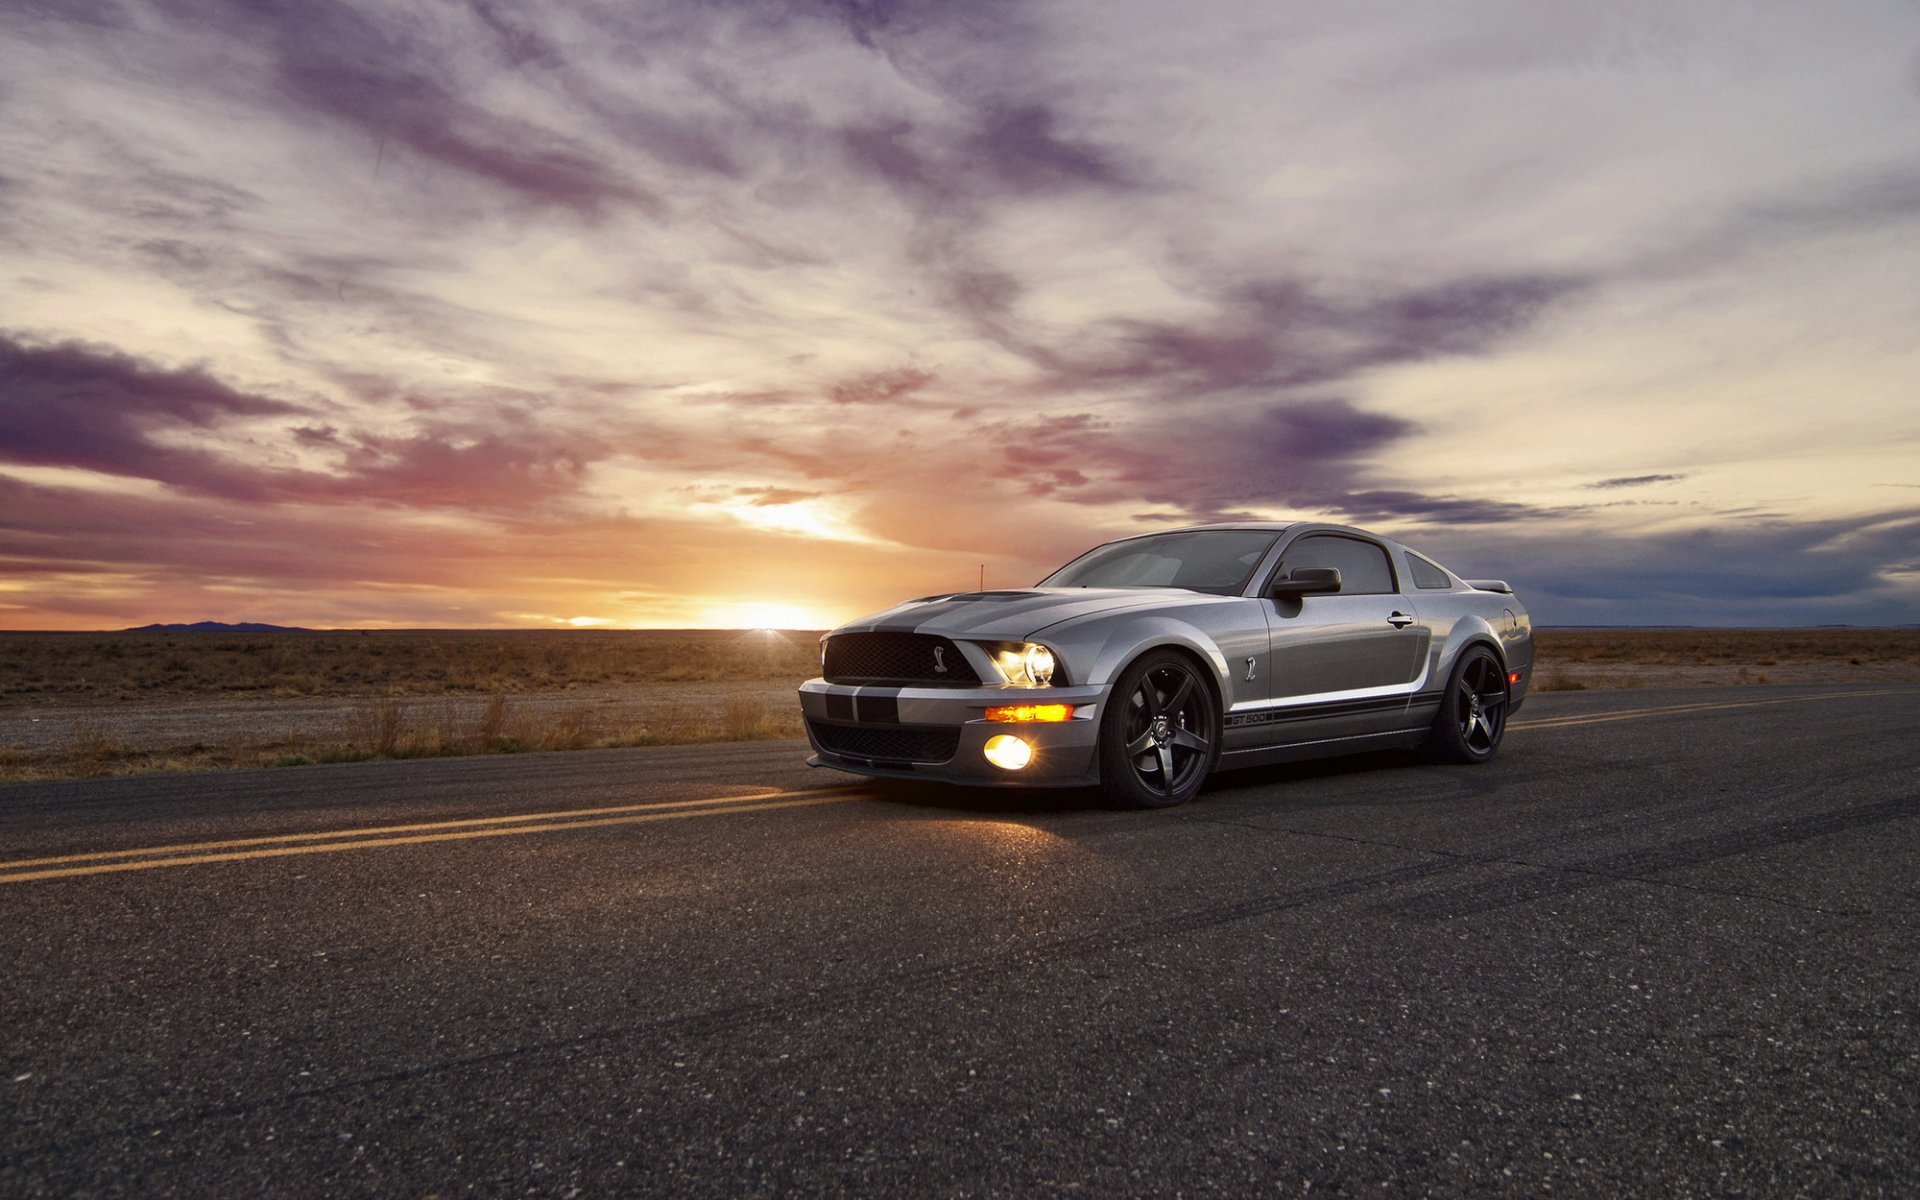 Ford Mustang Muscle Car Ford Avtooboi Sunset Mustang - Shelby Mustang With Sunset , HD Wallpaper & Backgrounds